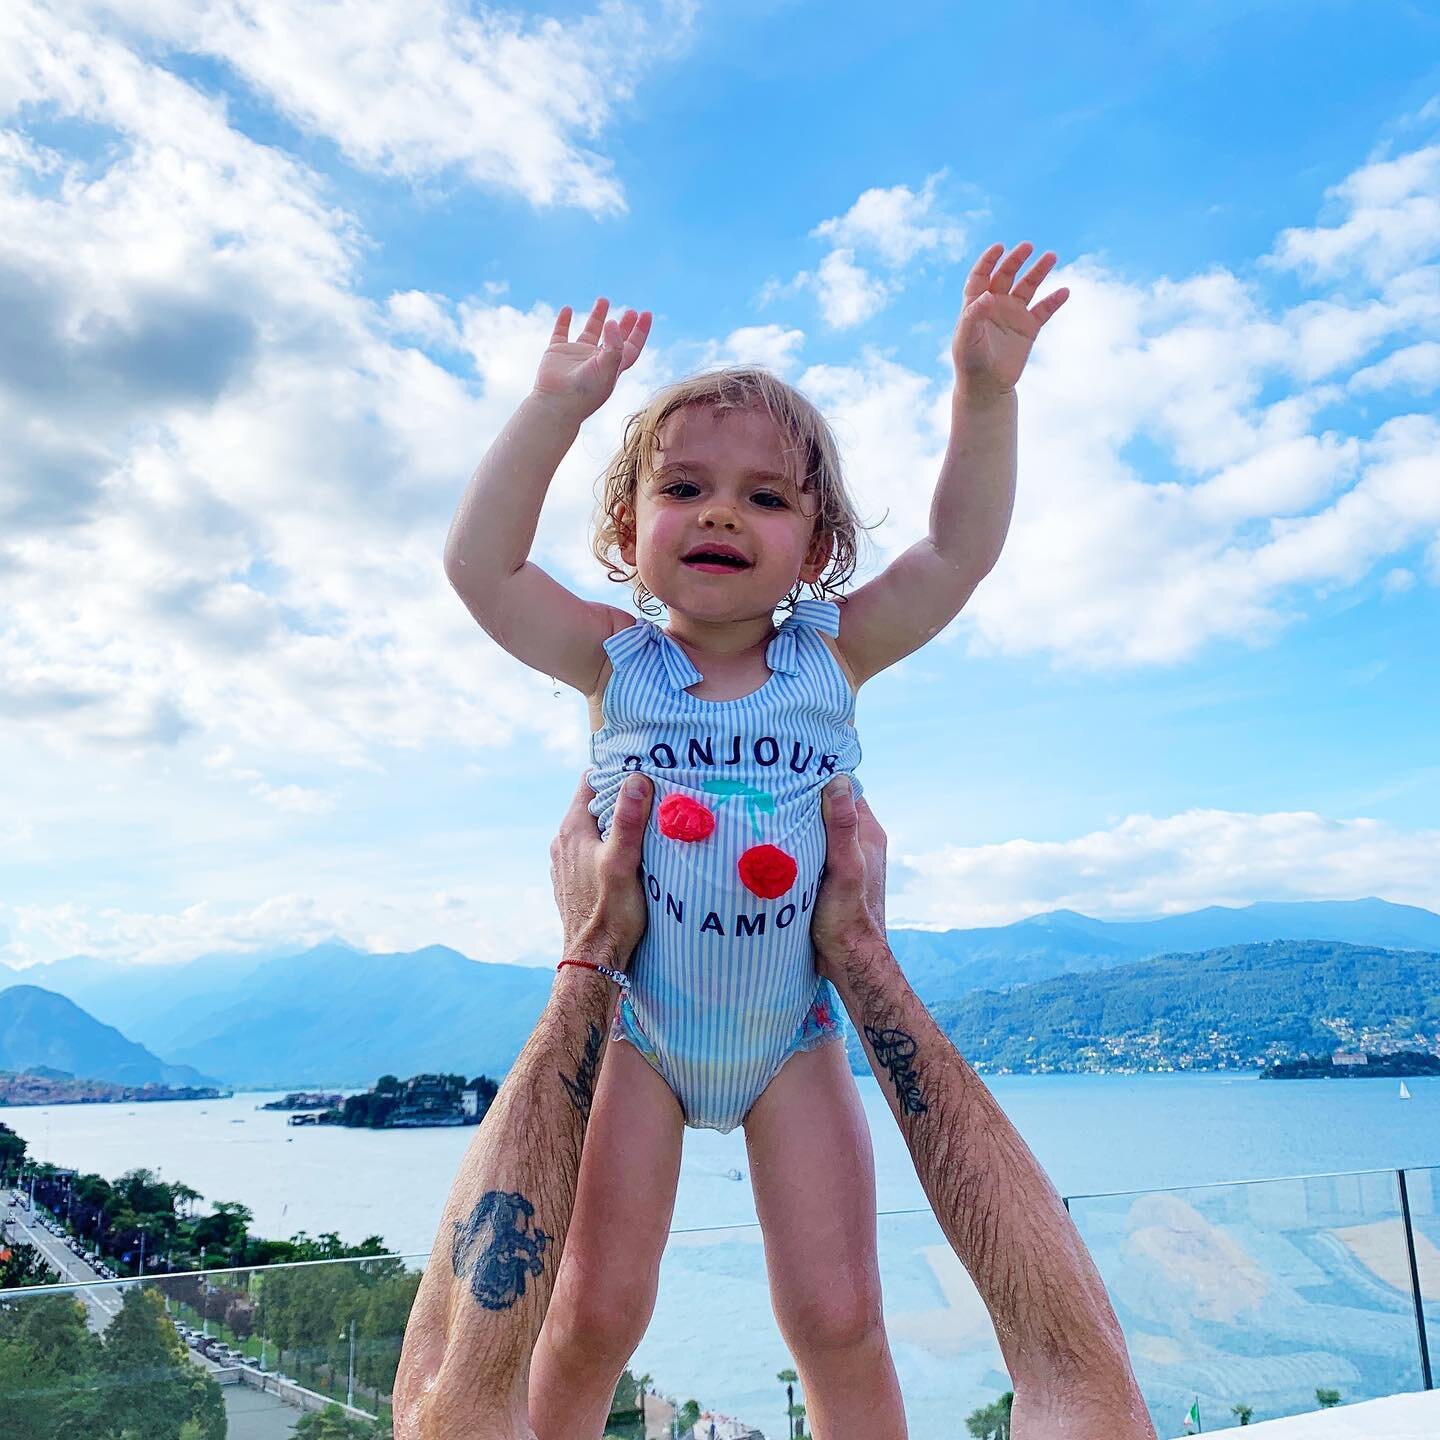 Later Lago Maggiore, Italy 🇮🇹 -&gt; Next Stop: Allg&auml;u, Germany 🇩🇪 

#flyingcharlotte #travelingwithatoddler #expatlife #roadtrip